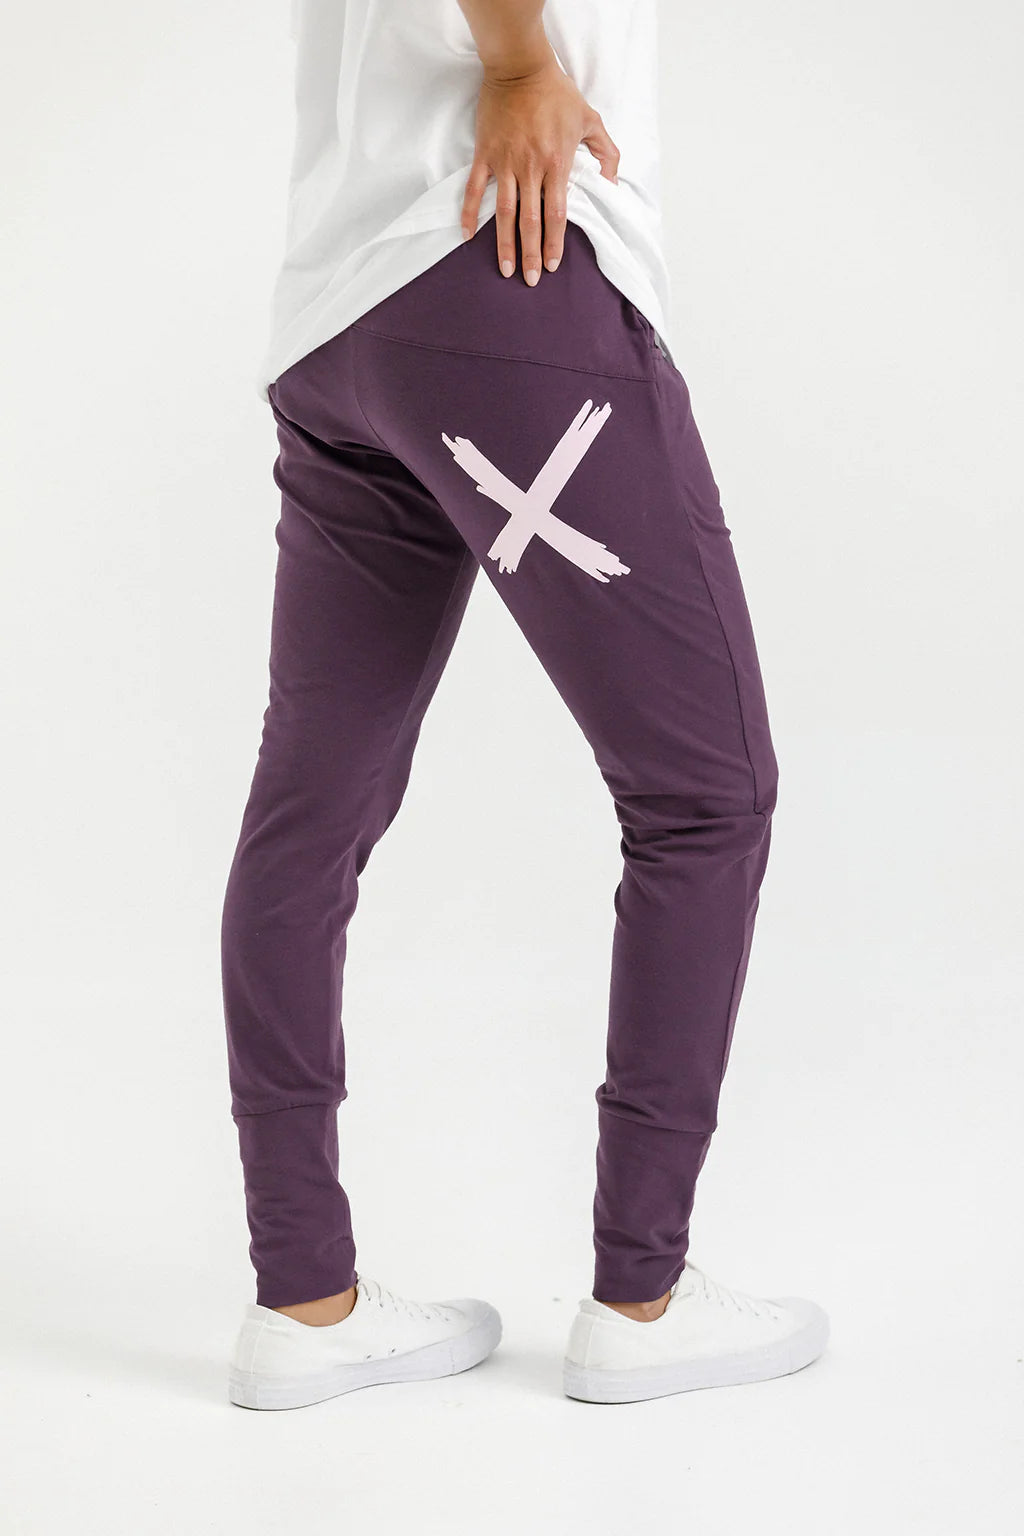 Homelee Apartment Pants - Plum with Pastel Pink